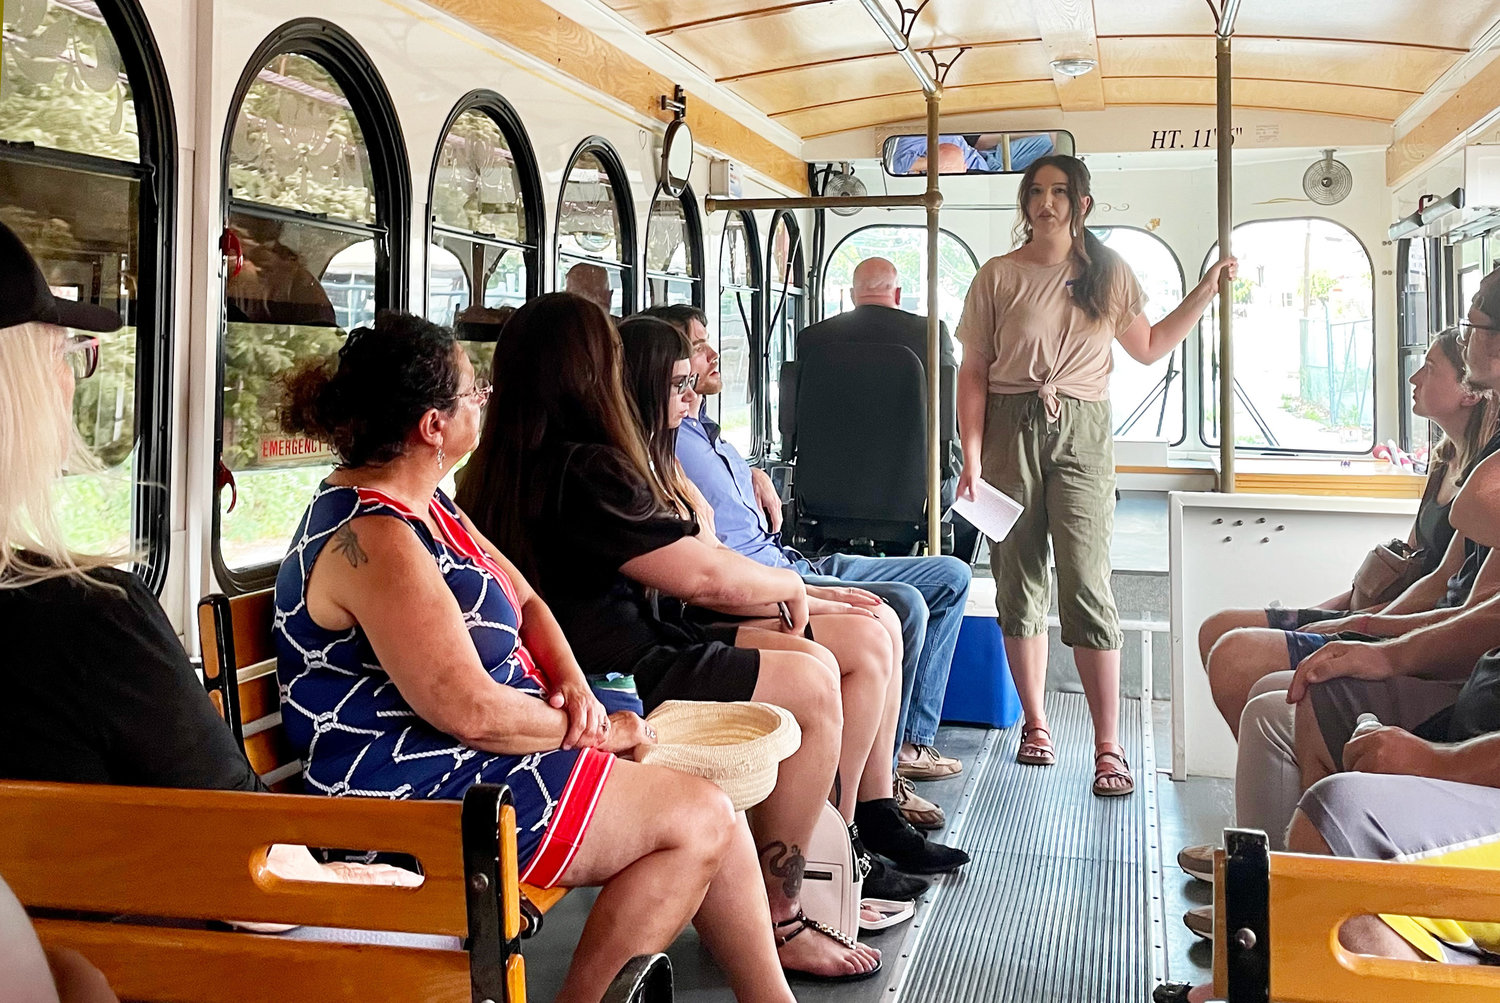 Shannon Hadfield, tour guide for Gallery Night Providence, addresses a trolley full of guests